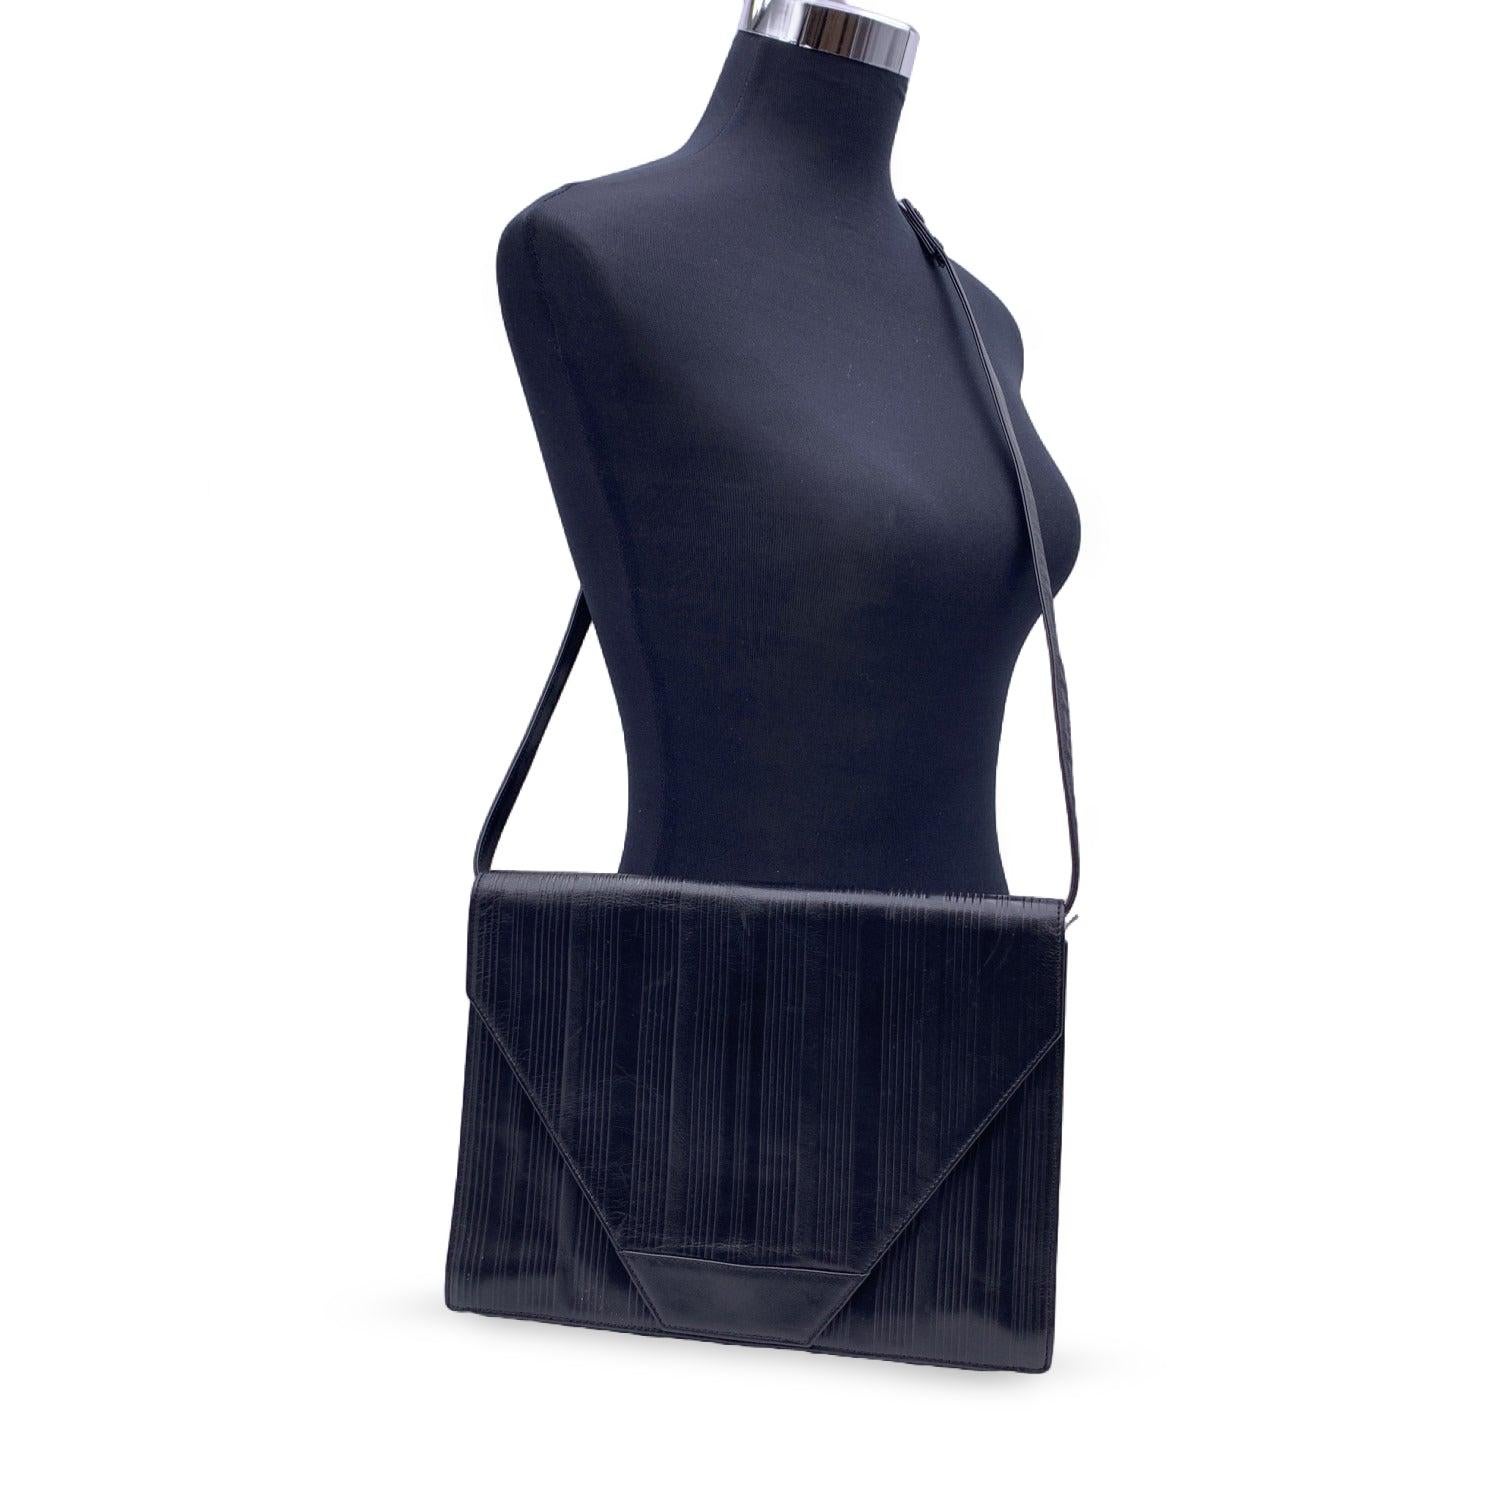 Gianni Versace vintage shoulder bag or clutch, crafted in black ribbed leather. It features a flap with magnetic button closure on the front. Removable shoulder strap. Black fabric lining. 1 side zip pocket inside. 'GIANNI VERSACE - Made in Italy'